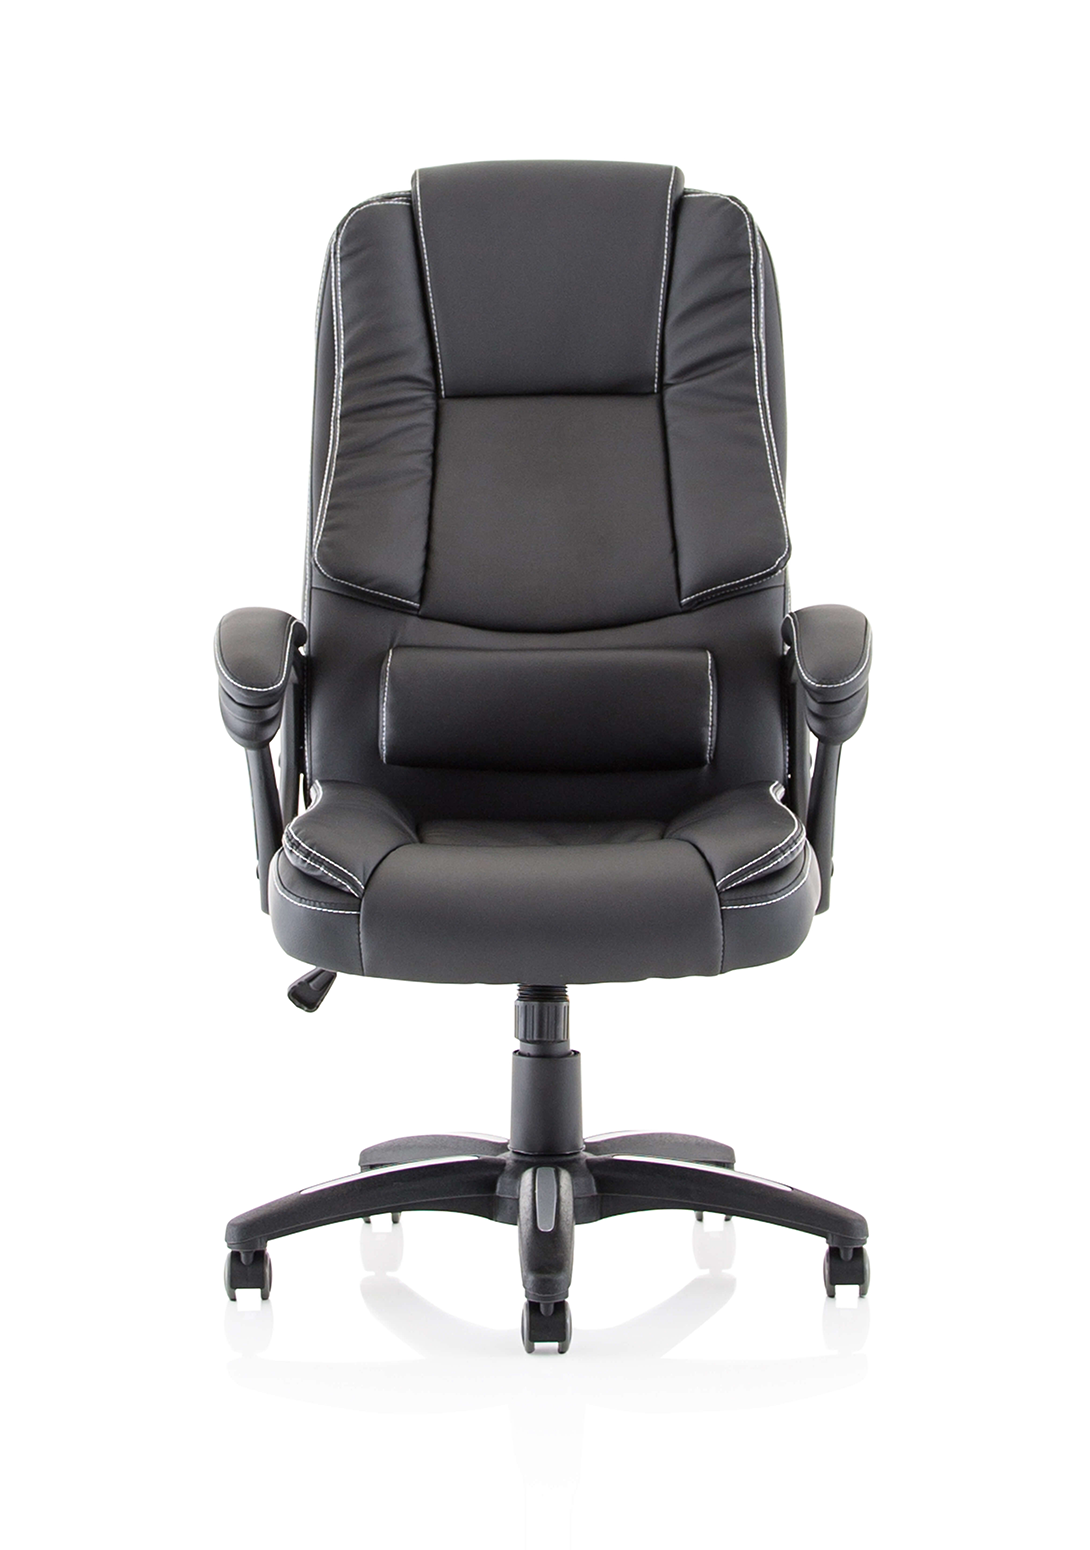 Dakota Exec Home Office Chair | Executive Chair | Home Office Furniture | Swivel Chair | Soft Padded Chair | Black Home Office Chair